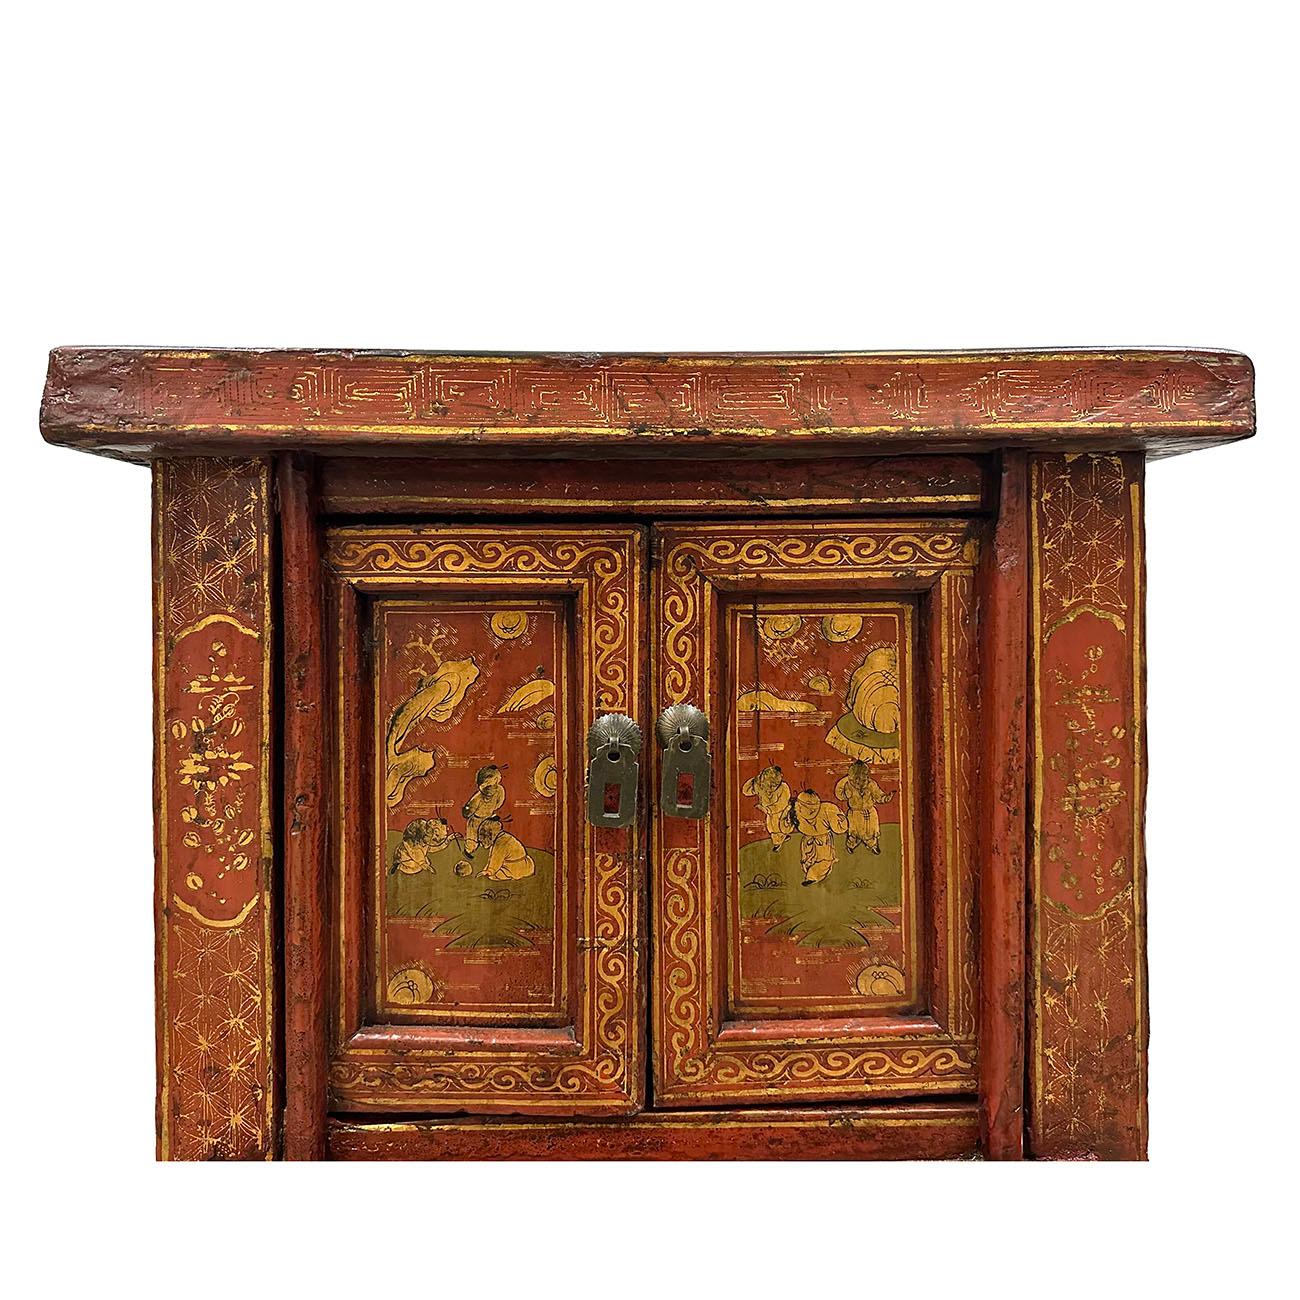 Hand-Painted Chinese Late Qing Dynasty Bedside Wooden Cabinet with Period Painting Art Works For Sale